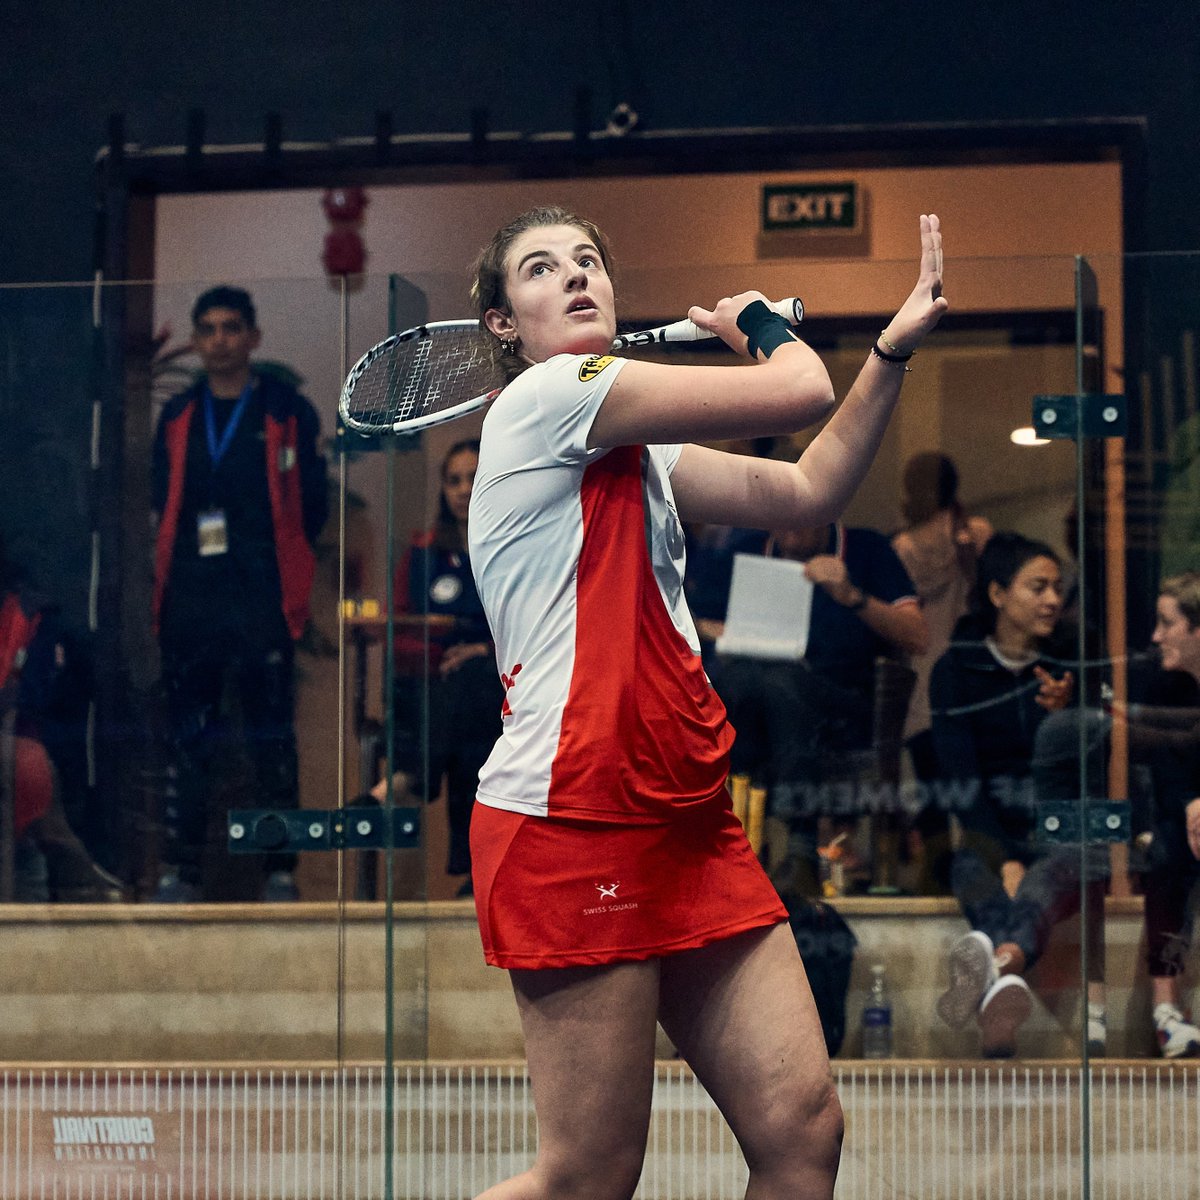 🇨🇭 The @EuropeanSquash Team D1 & D2 Championships have begun in Uster, Switzerland 📺 Courts 4 & 6 are streaming live and free on WORLDSQUASH.TV right now, while more viewing options are available at europeansquash.com